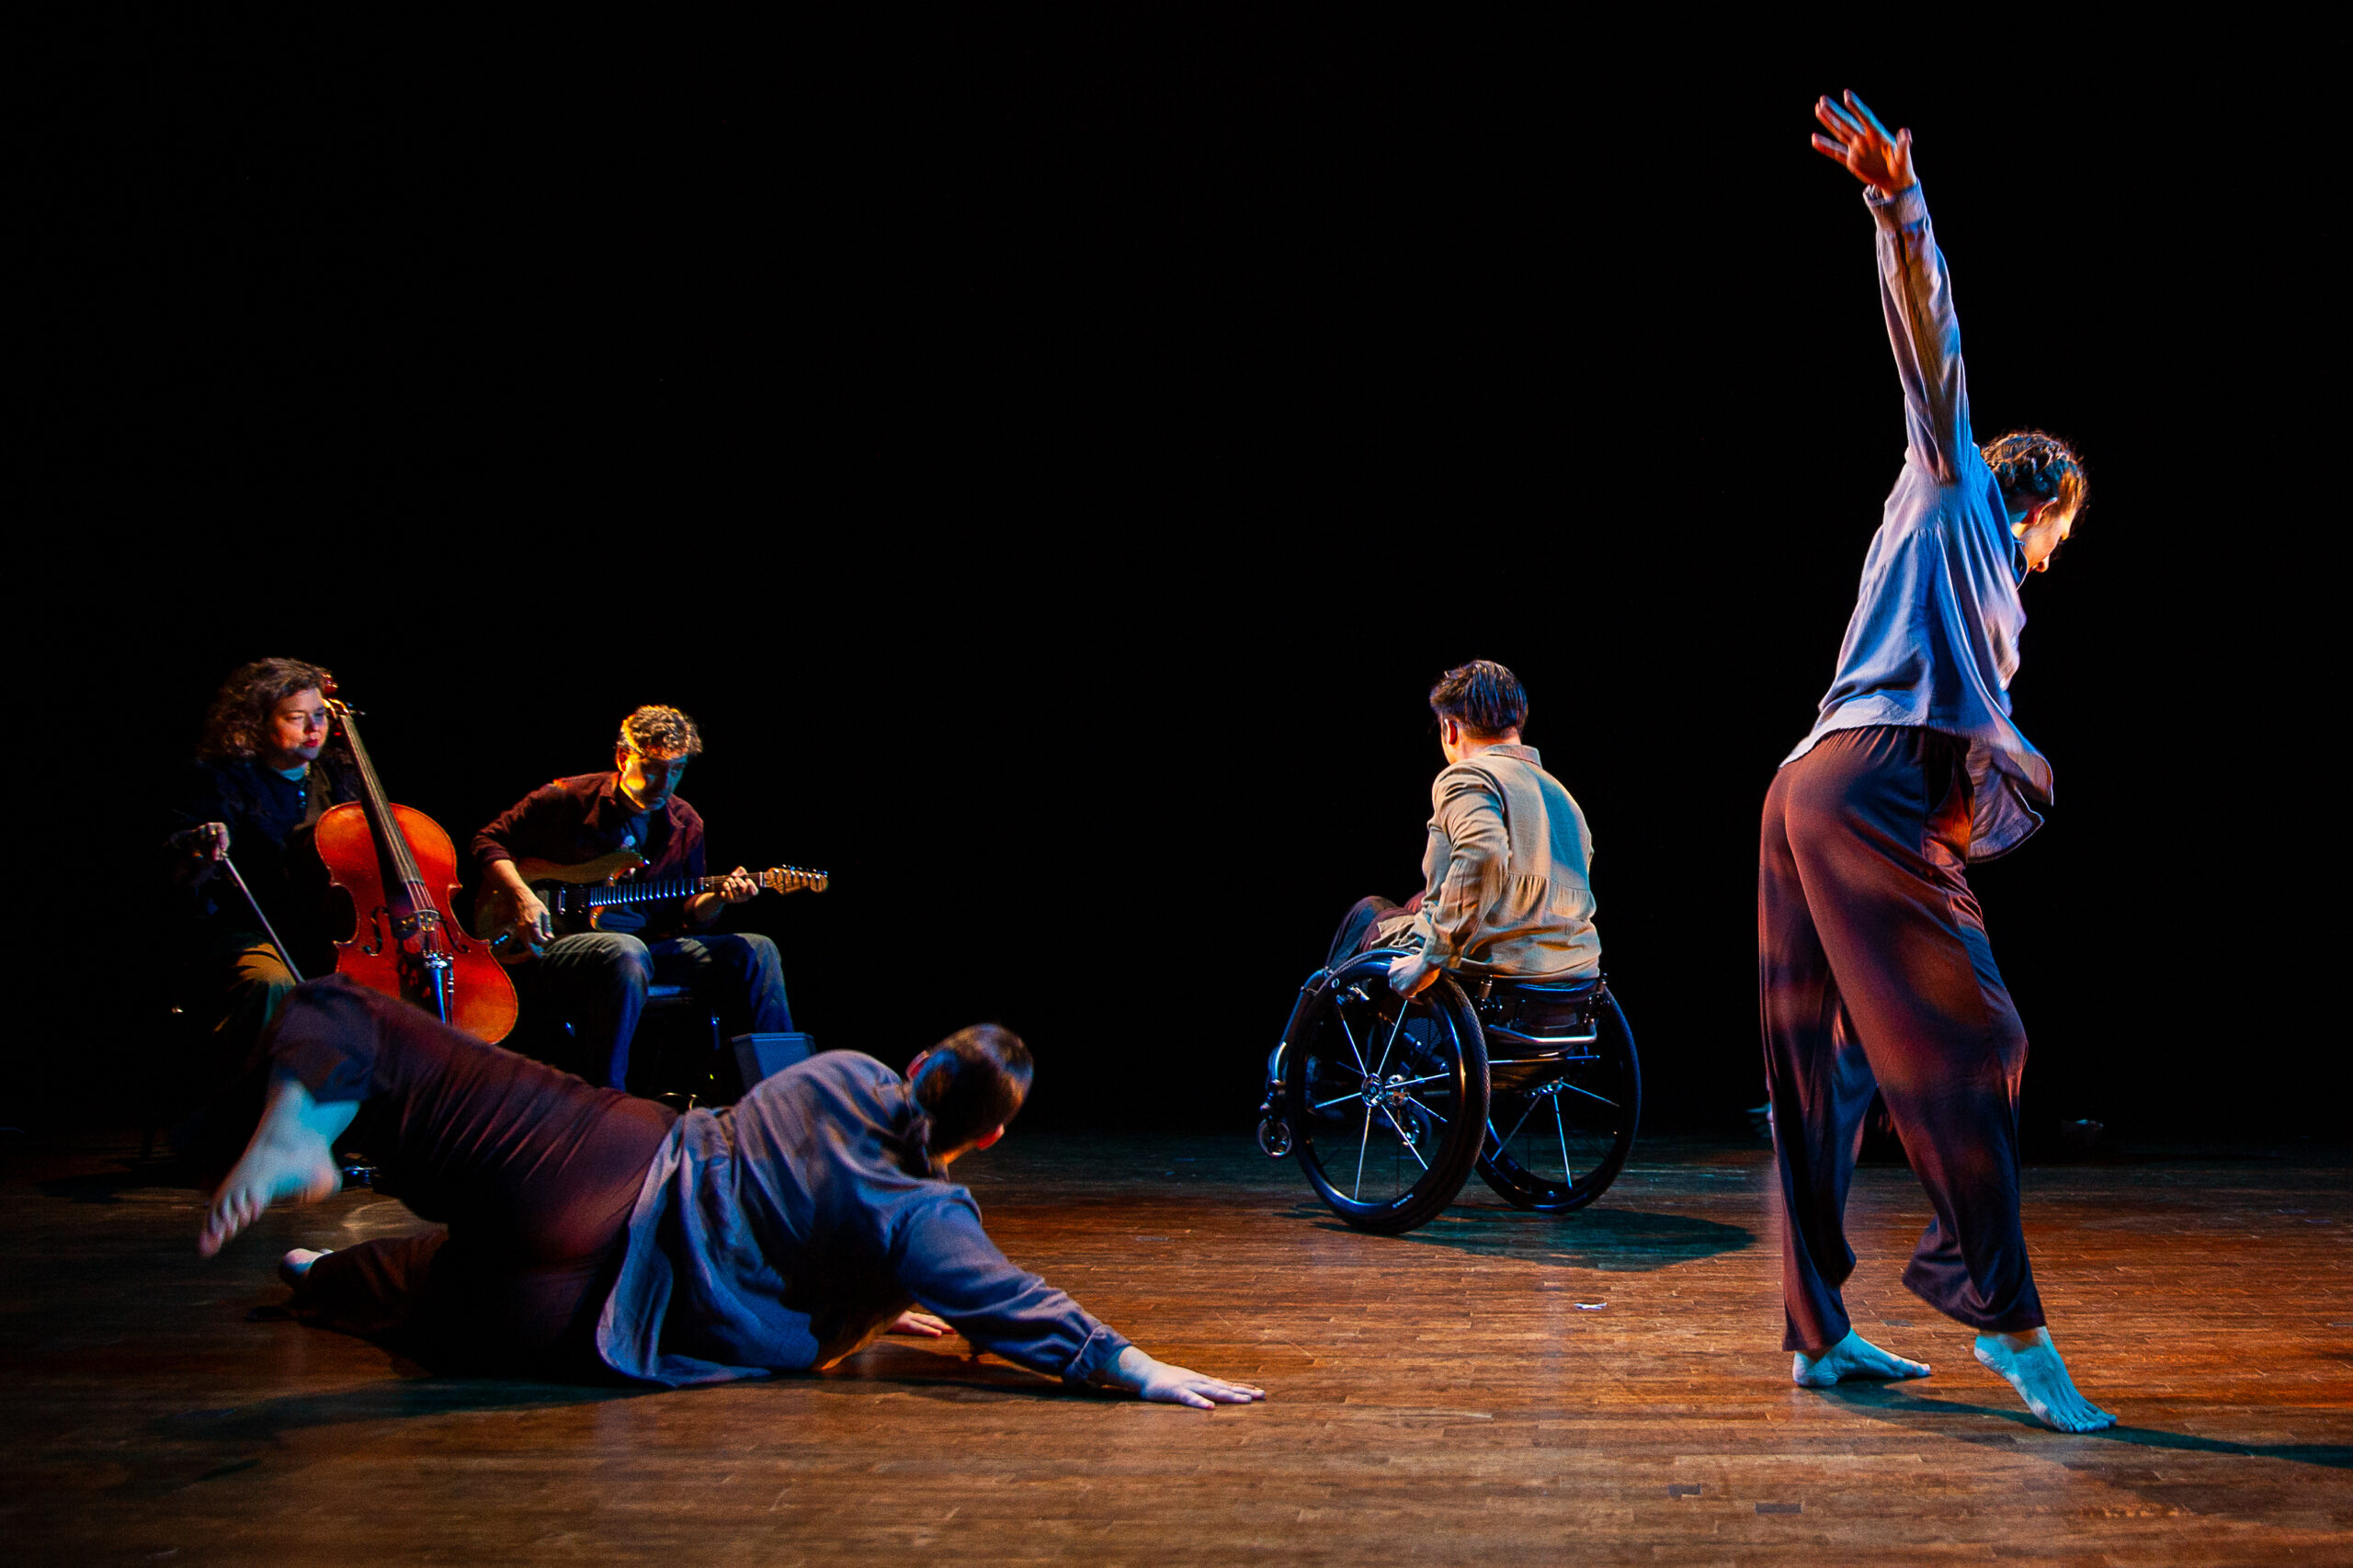 A cellist and a guitarist are picutured on the right of the photo. Three dancers, one on the floor, one in a manual wheelchair, and one standing are caught mid motion.